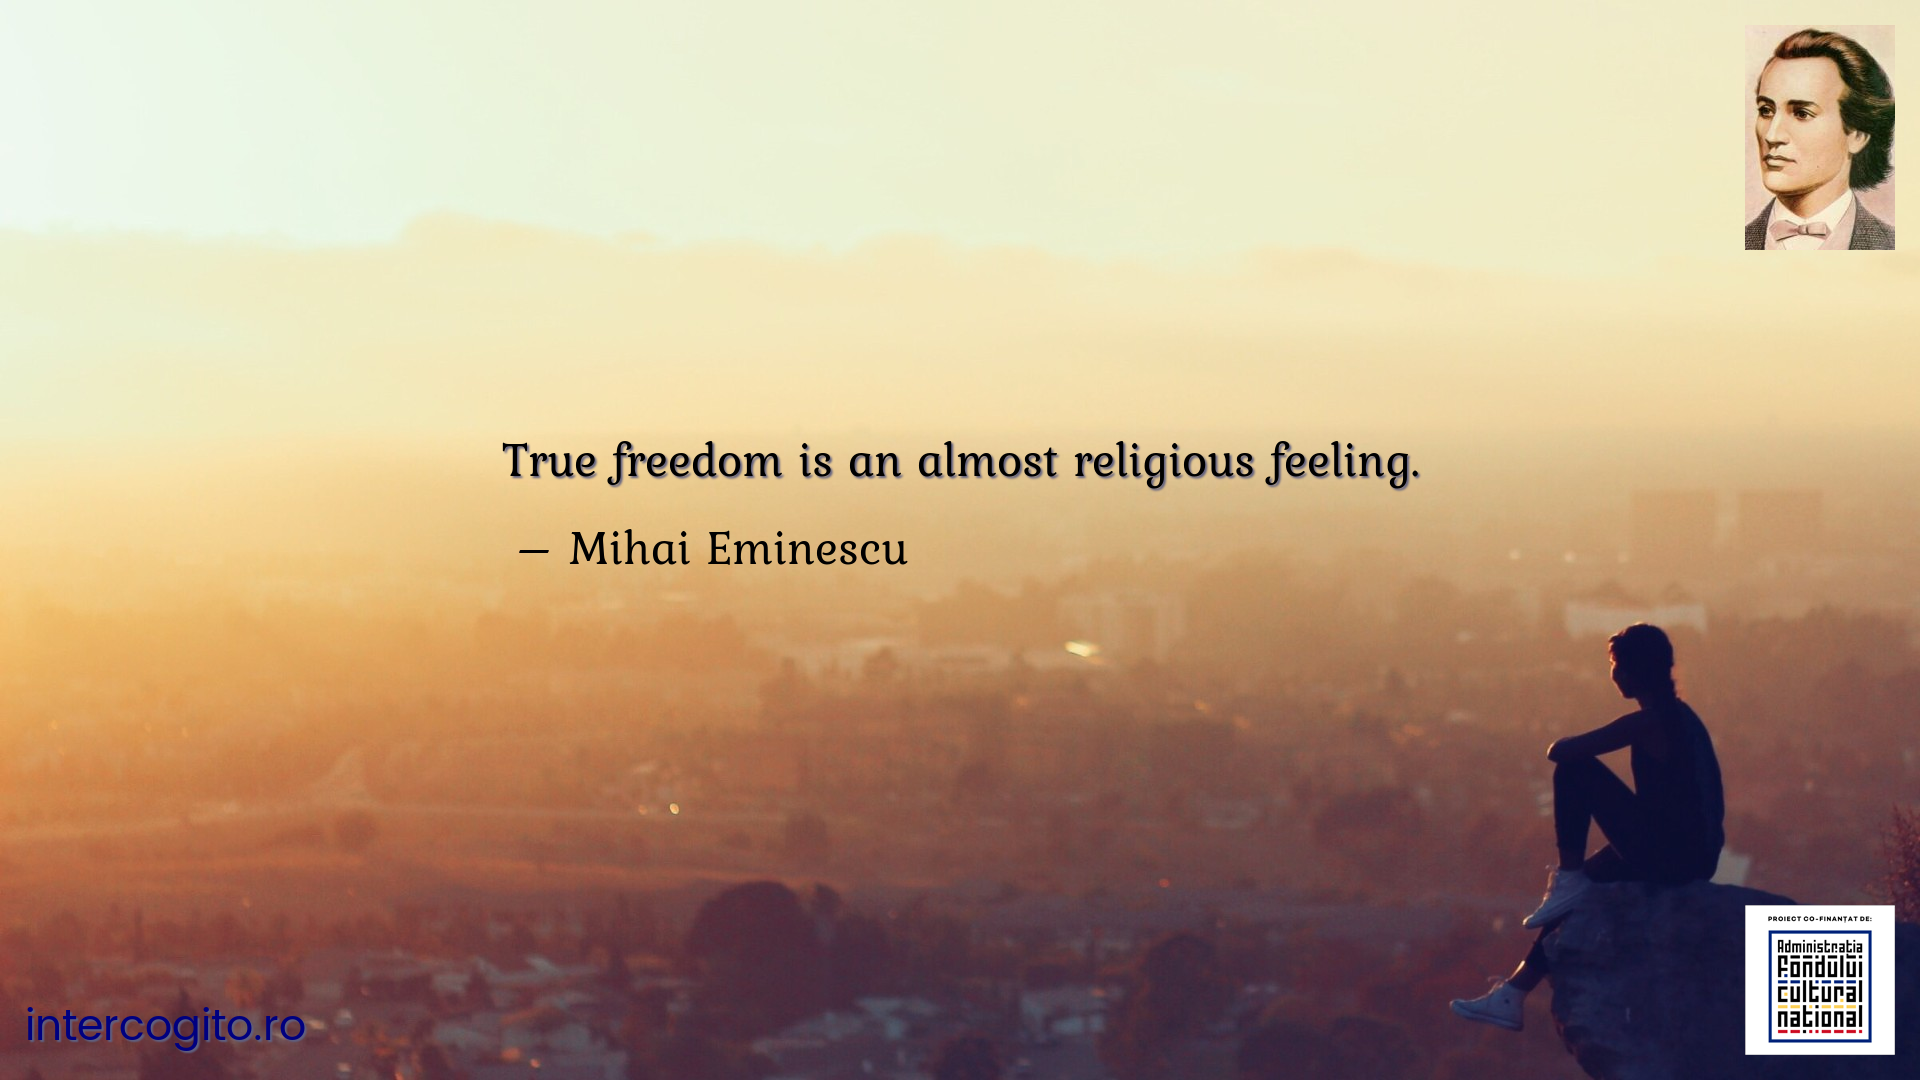 True freedom is an almost religious feeling.